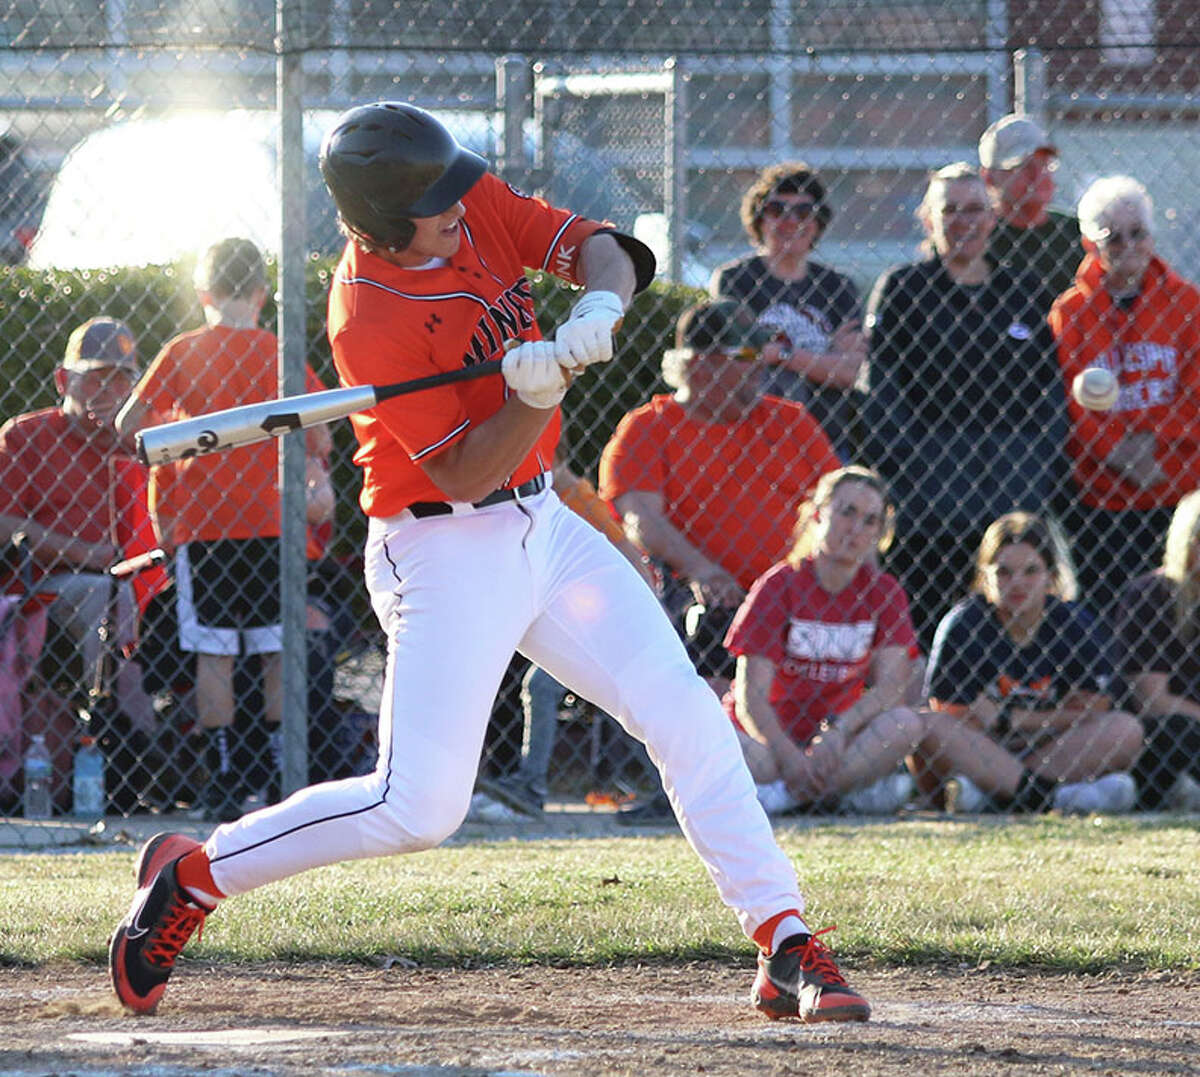 Gillespie's Kamryn Link, shown getting a RBI hit in a game earlier this season in Gillespie, had two doubles Monday in the Miners' SCC victory at Hillsboro.